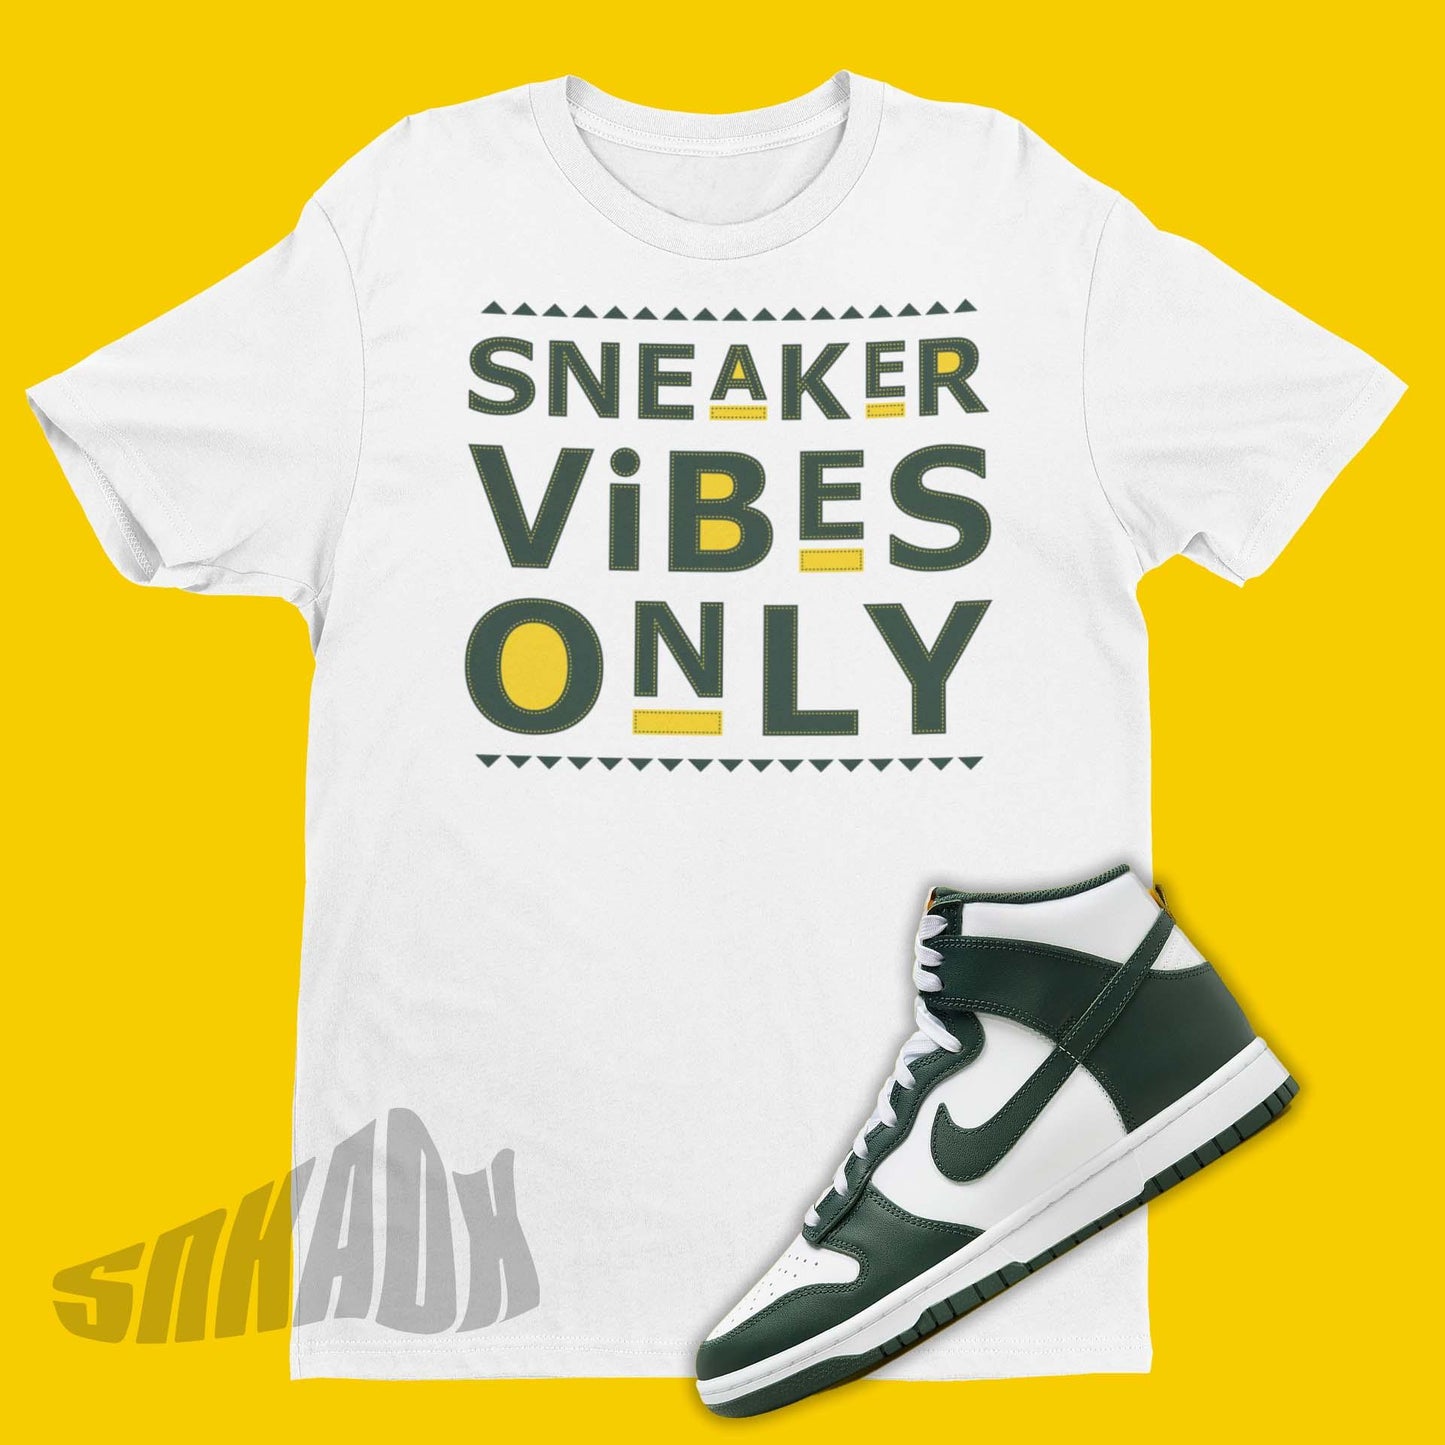 Sneaker Vibes Only Shirt To Match Nike Dunk High Noble Green